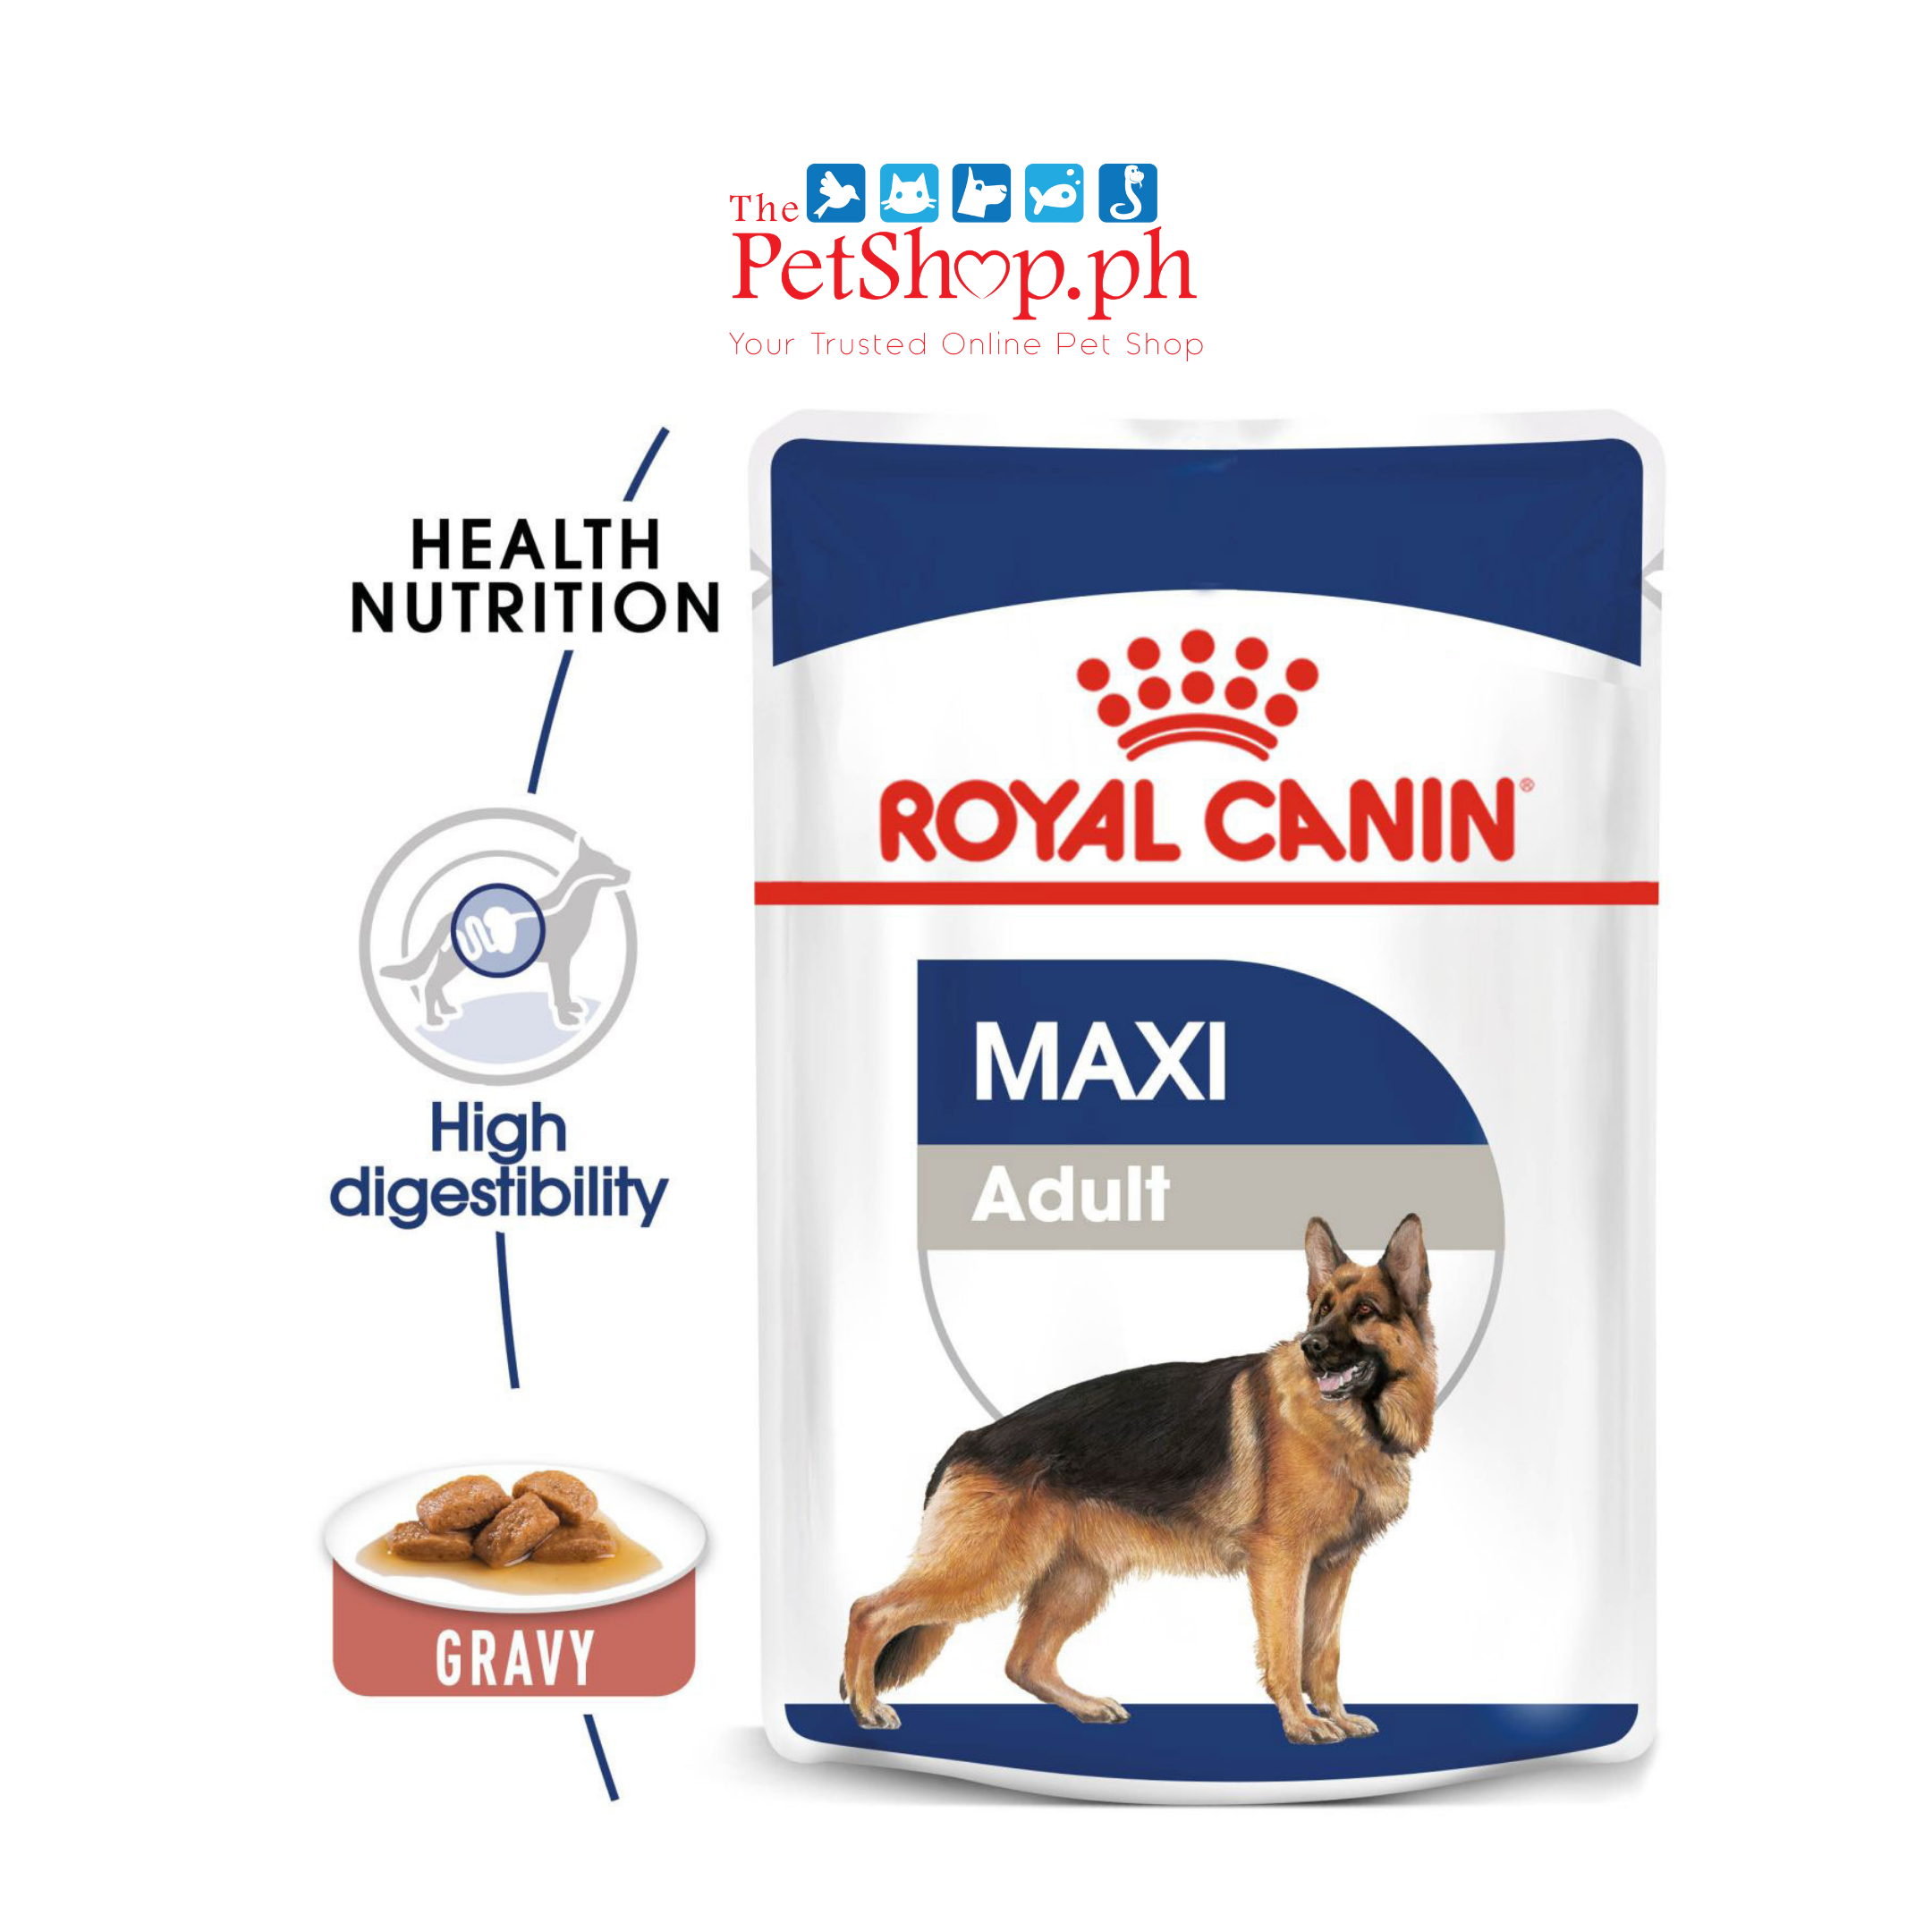 Royal Canin Maxi Adult 140g Pouch Wet Dog Food (Set of 10)